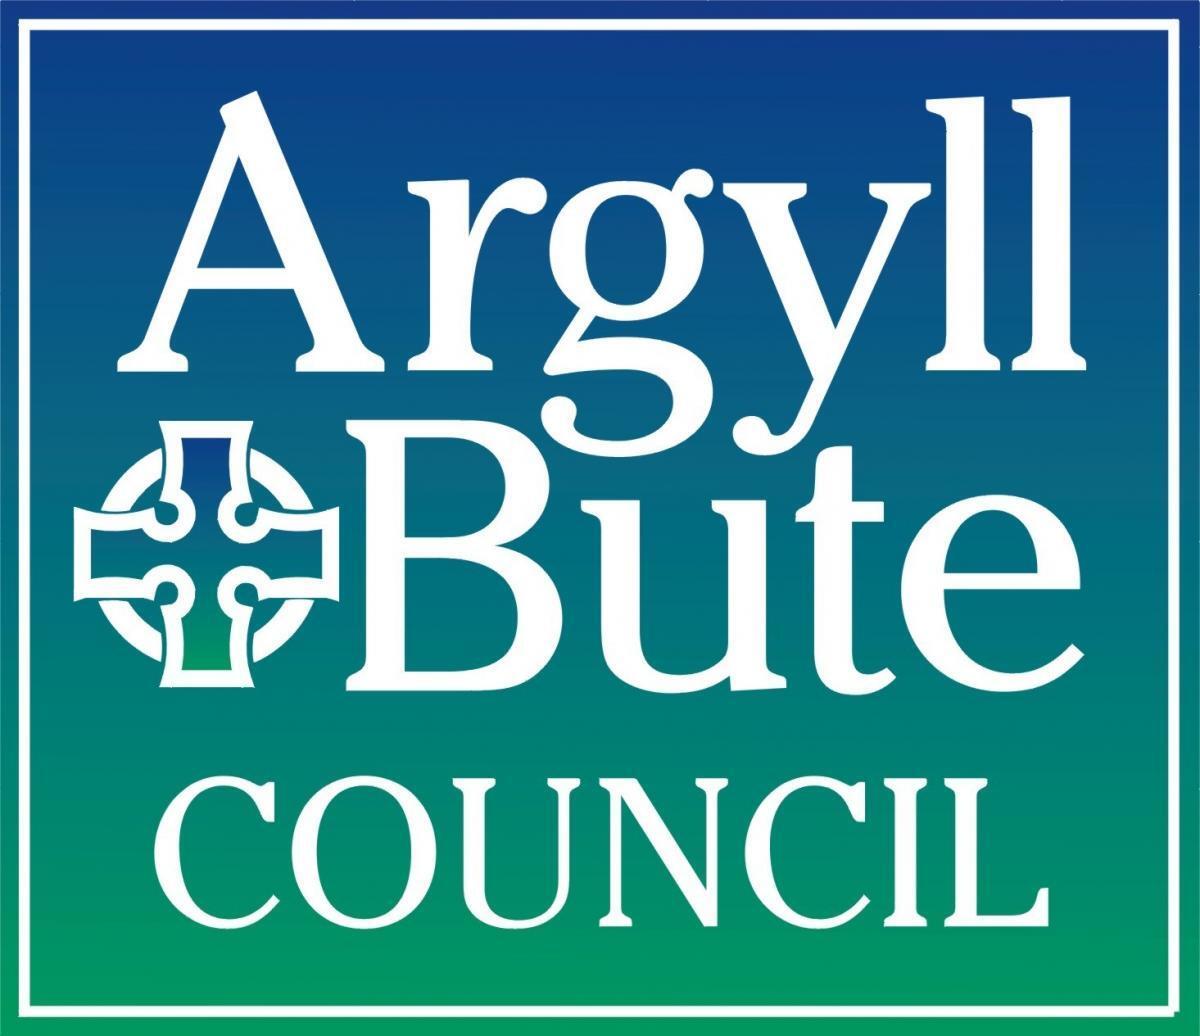 Argyll residents warned to be wary of rogue traders